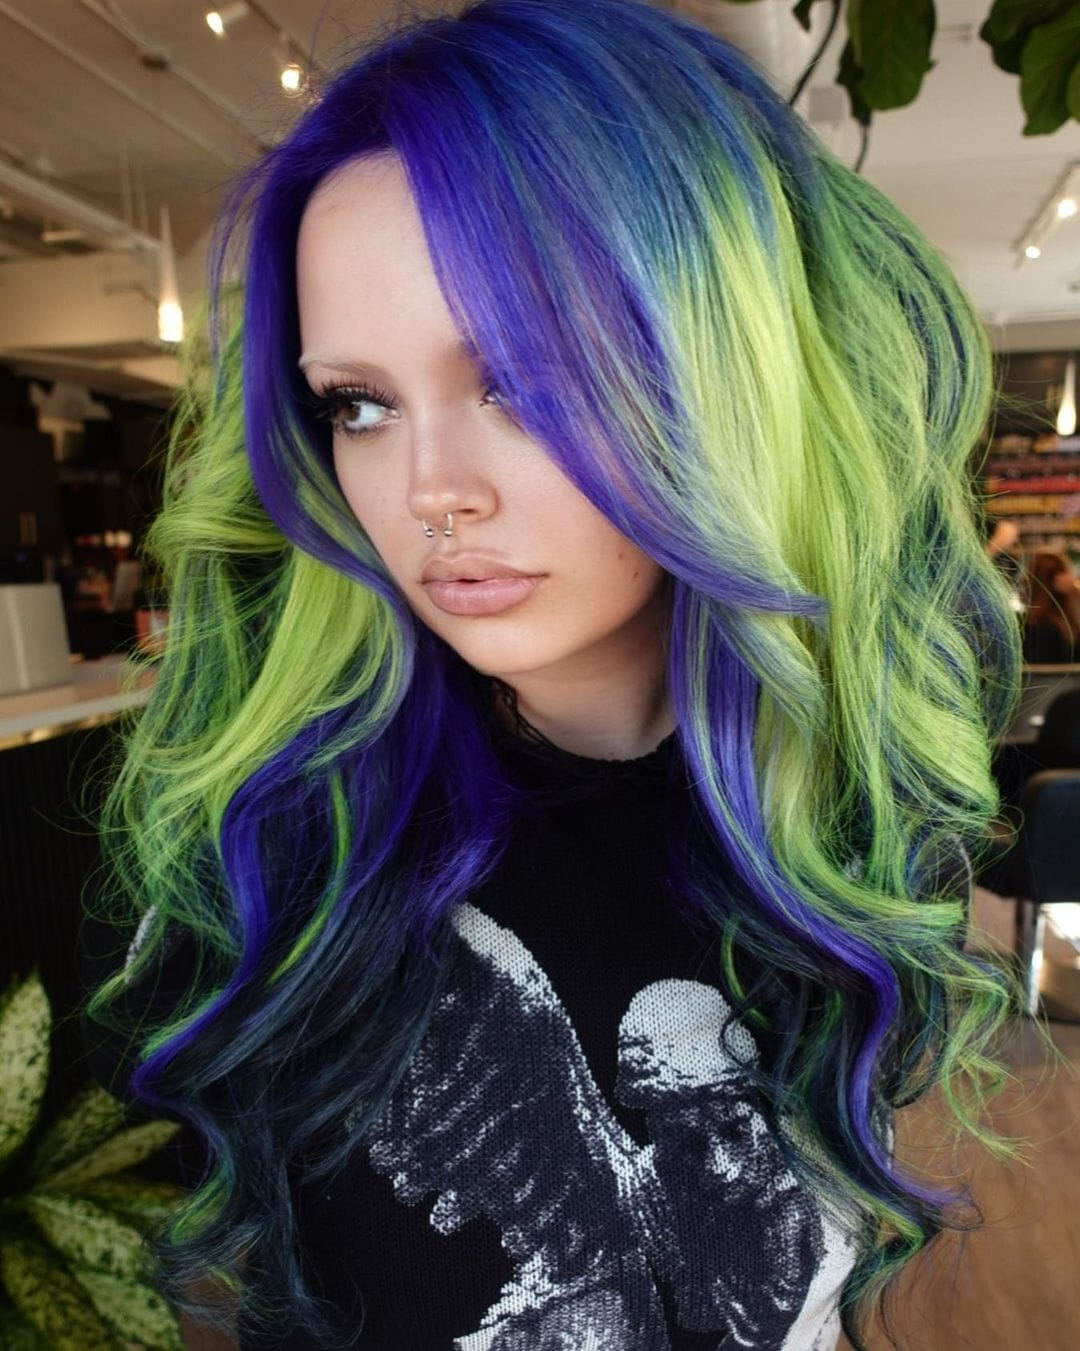 100+ Best Colorful Hair Ideas images 89